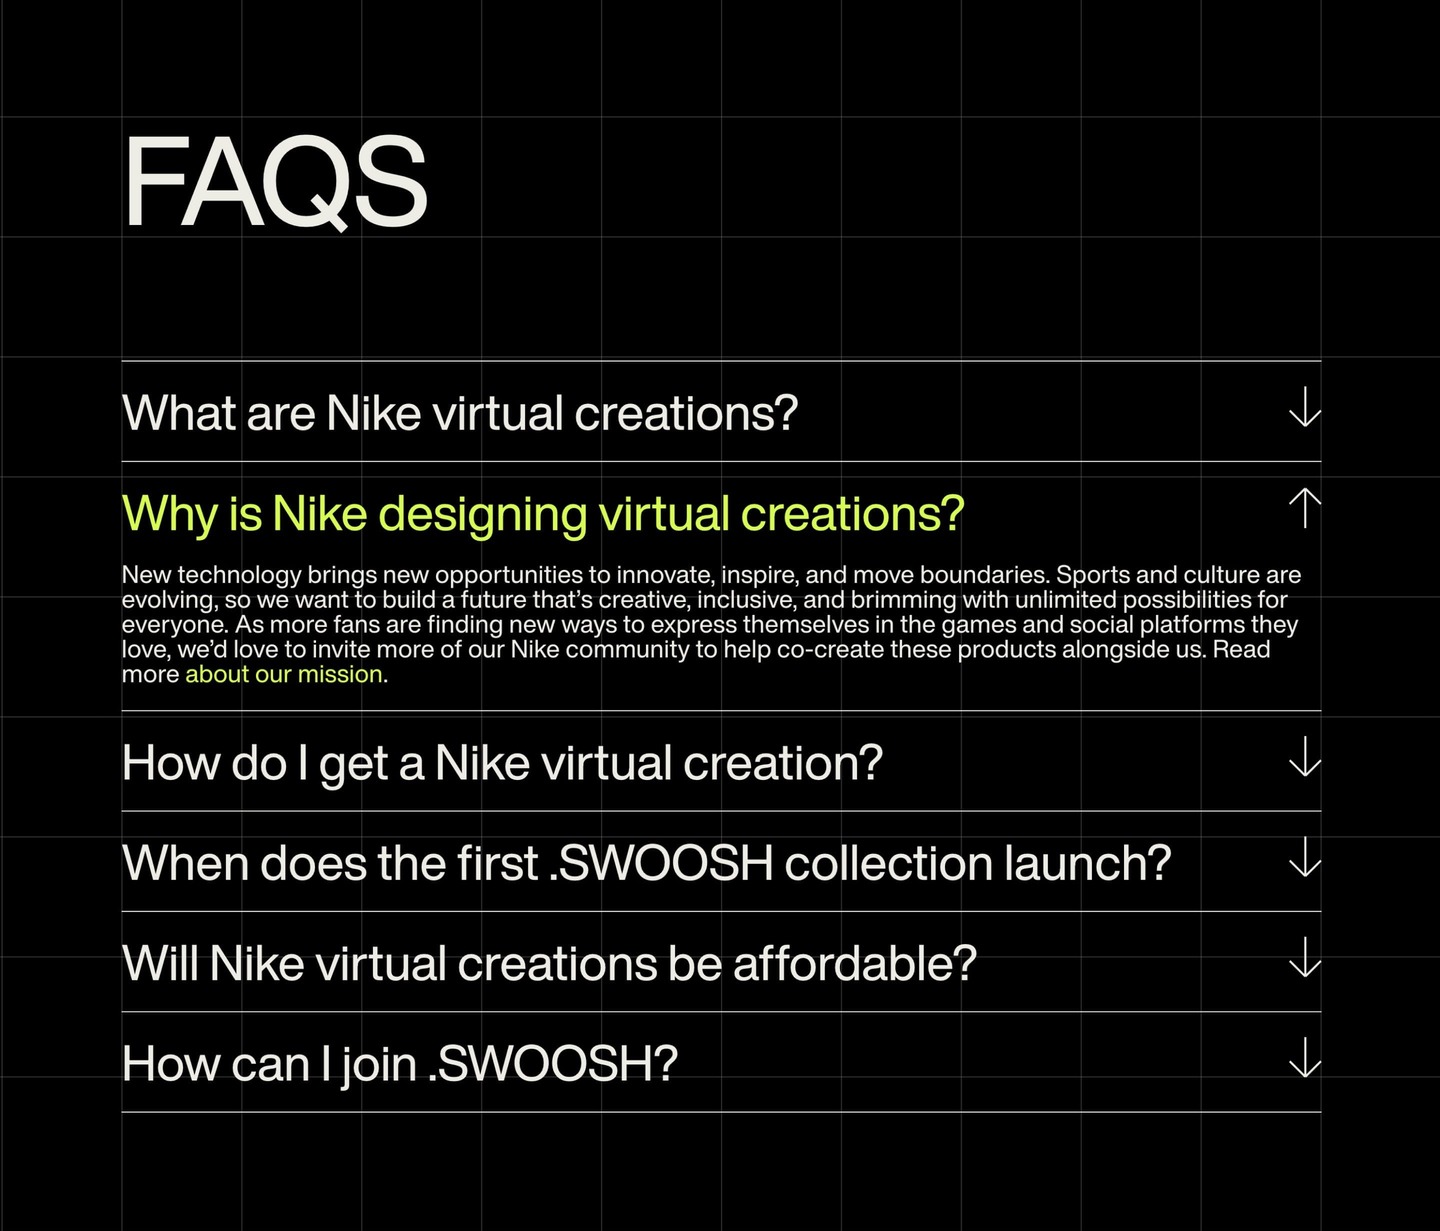 FAQ page example